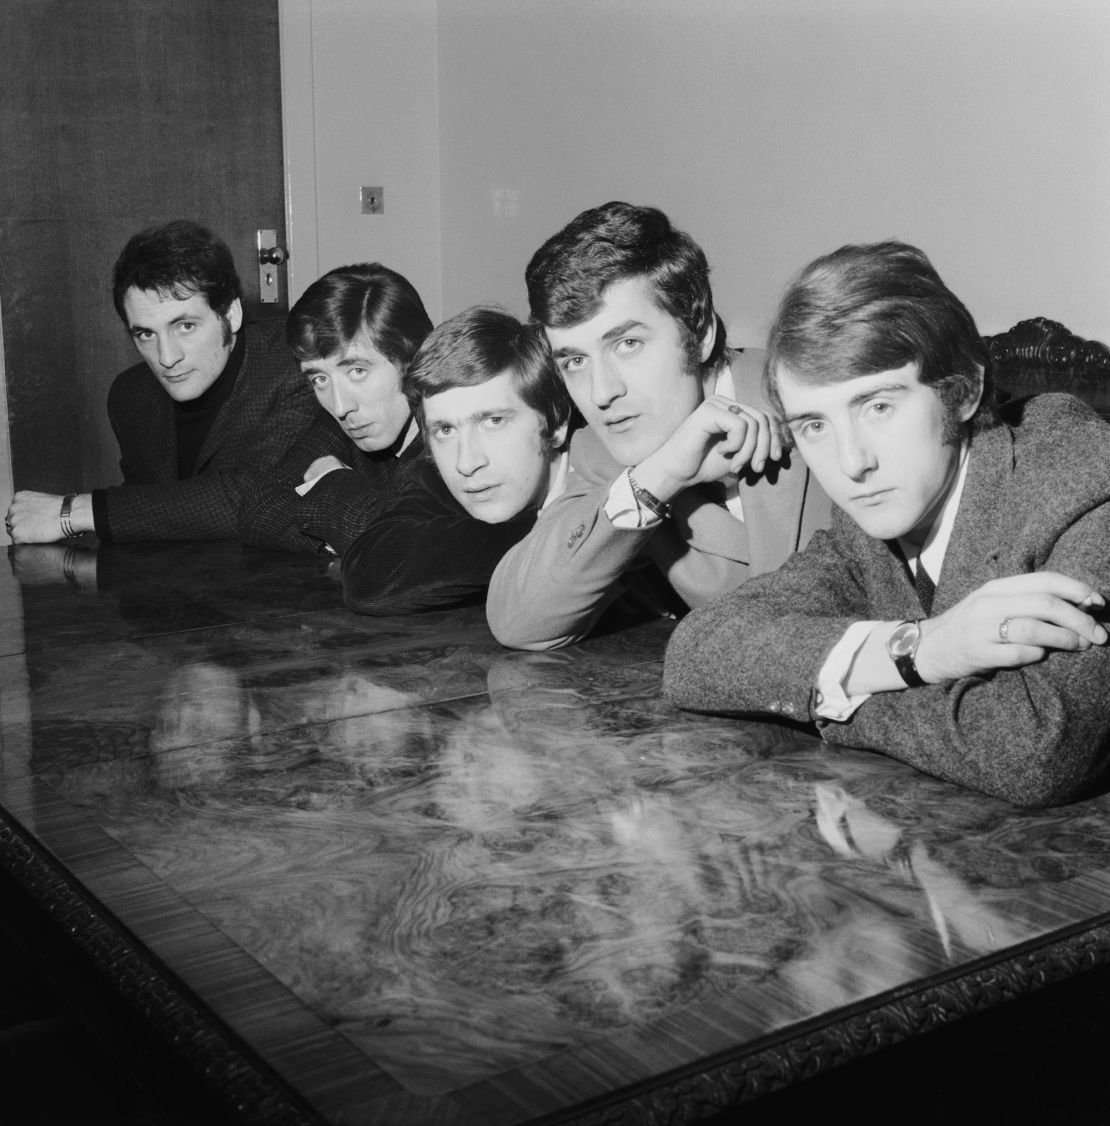 12th February 1965:  British pop group, The Moody Blues at a meeting in their shared house in south London. Left to right : Mike Pinder, Clint Warwick, Graeme Edge, Ray Thomas and Denny Laine.  (Photo by Chris Ware/Keystone Features/Getty Images)